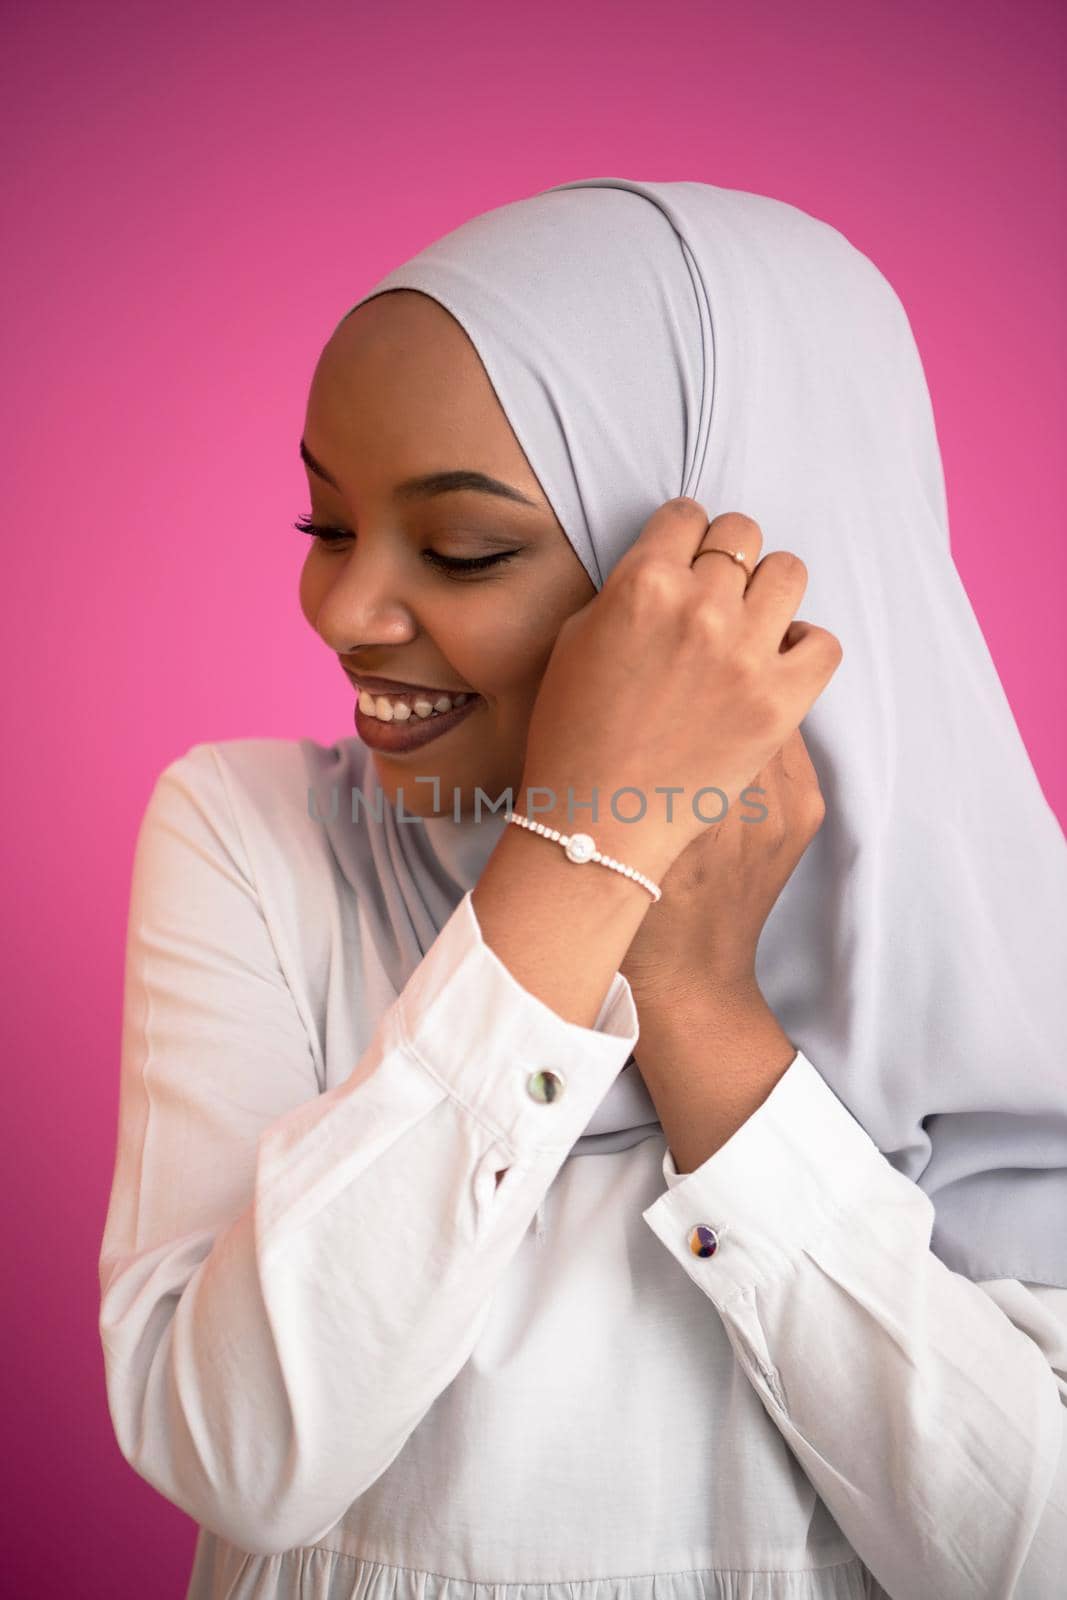 young afro beauty wearing traditional islamic clothes on plastic pink background